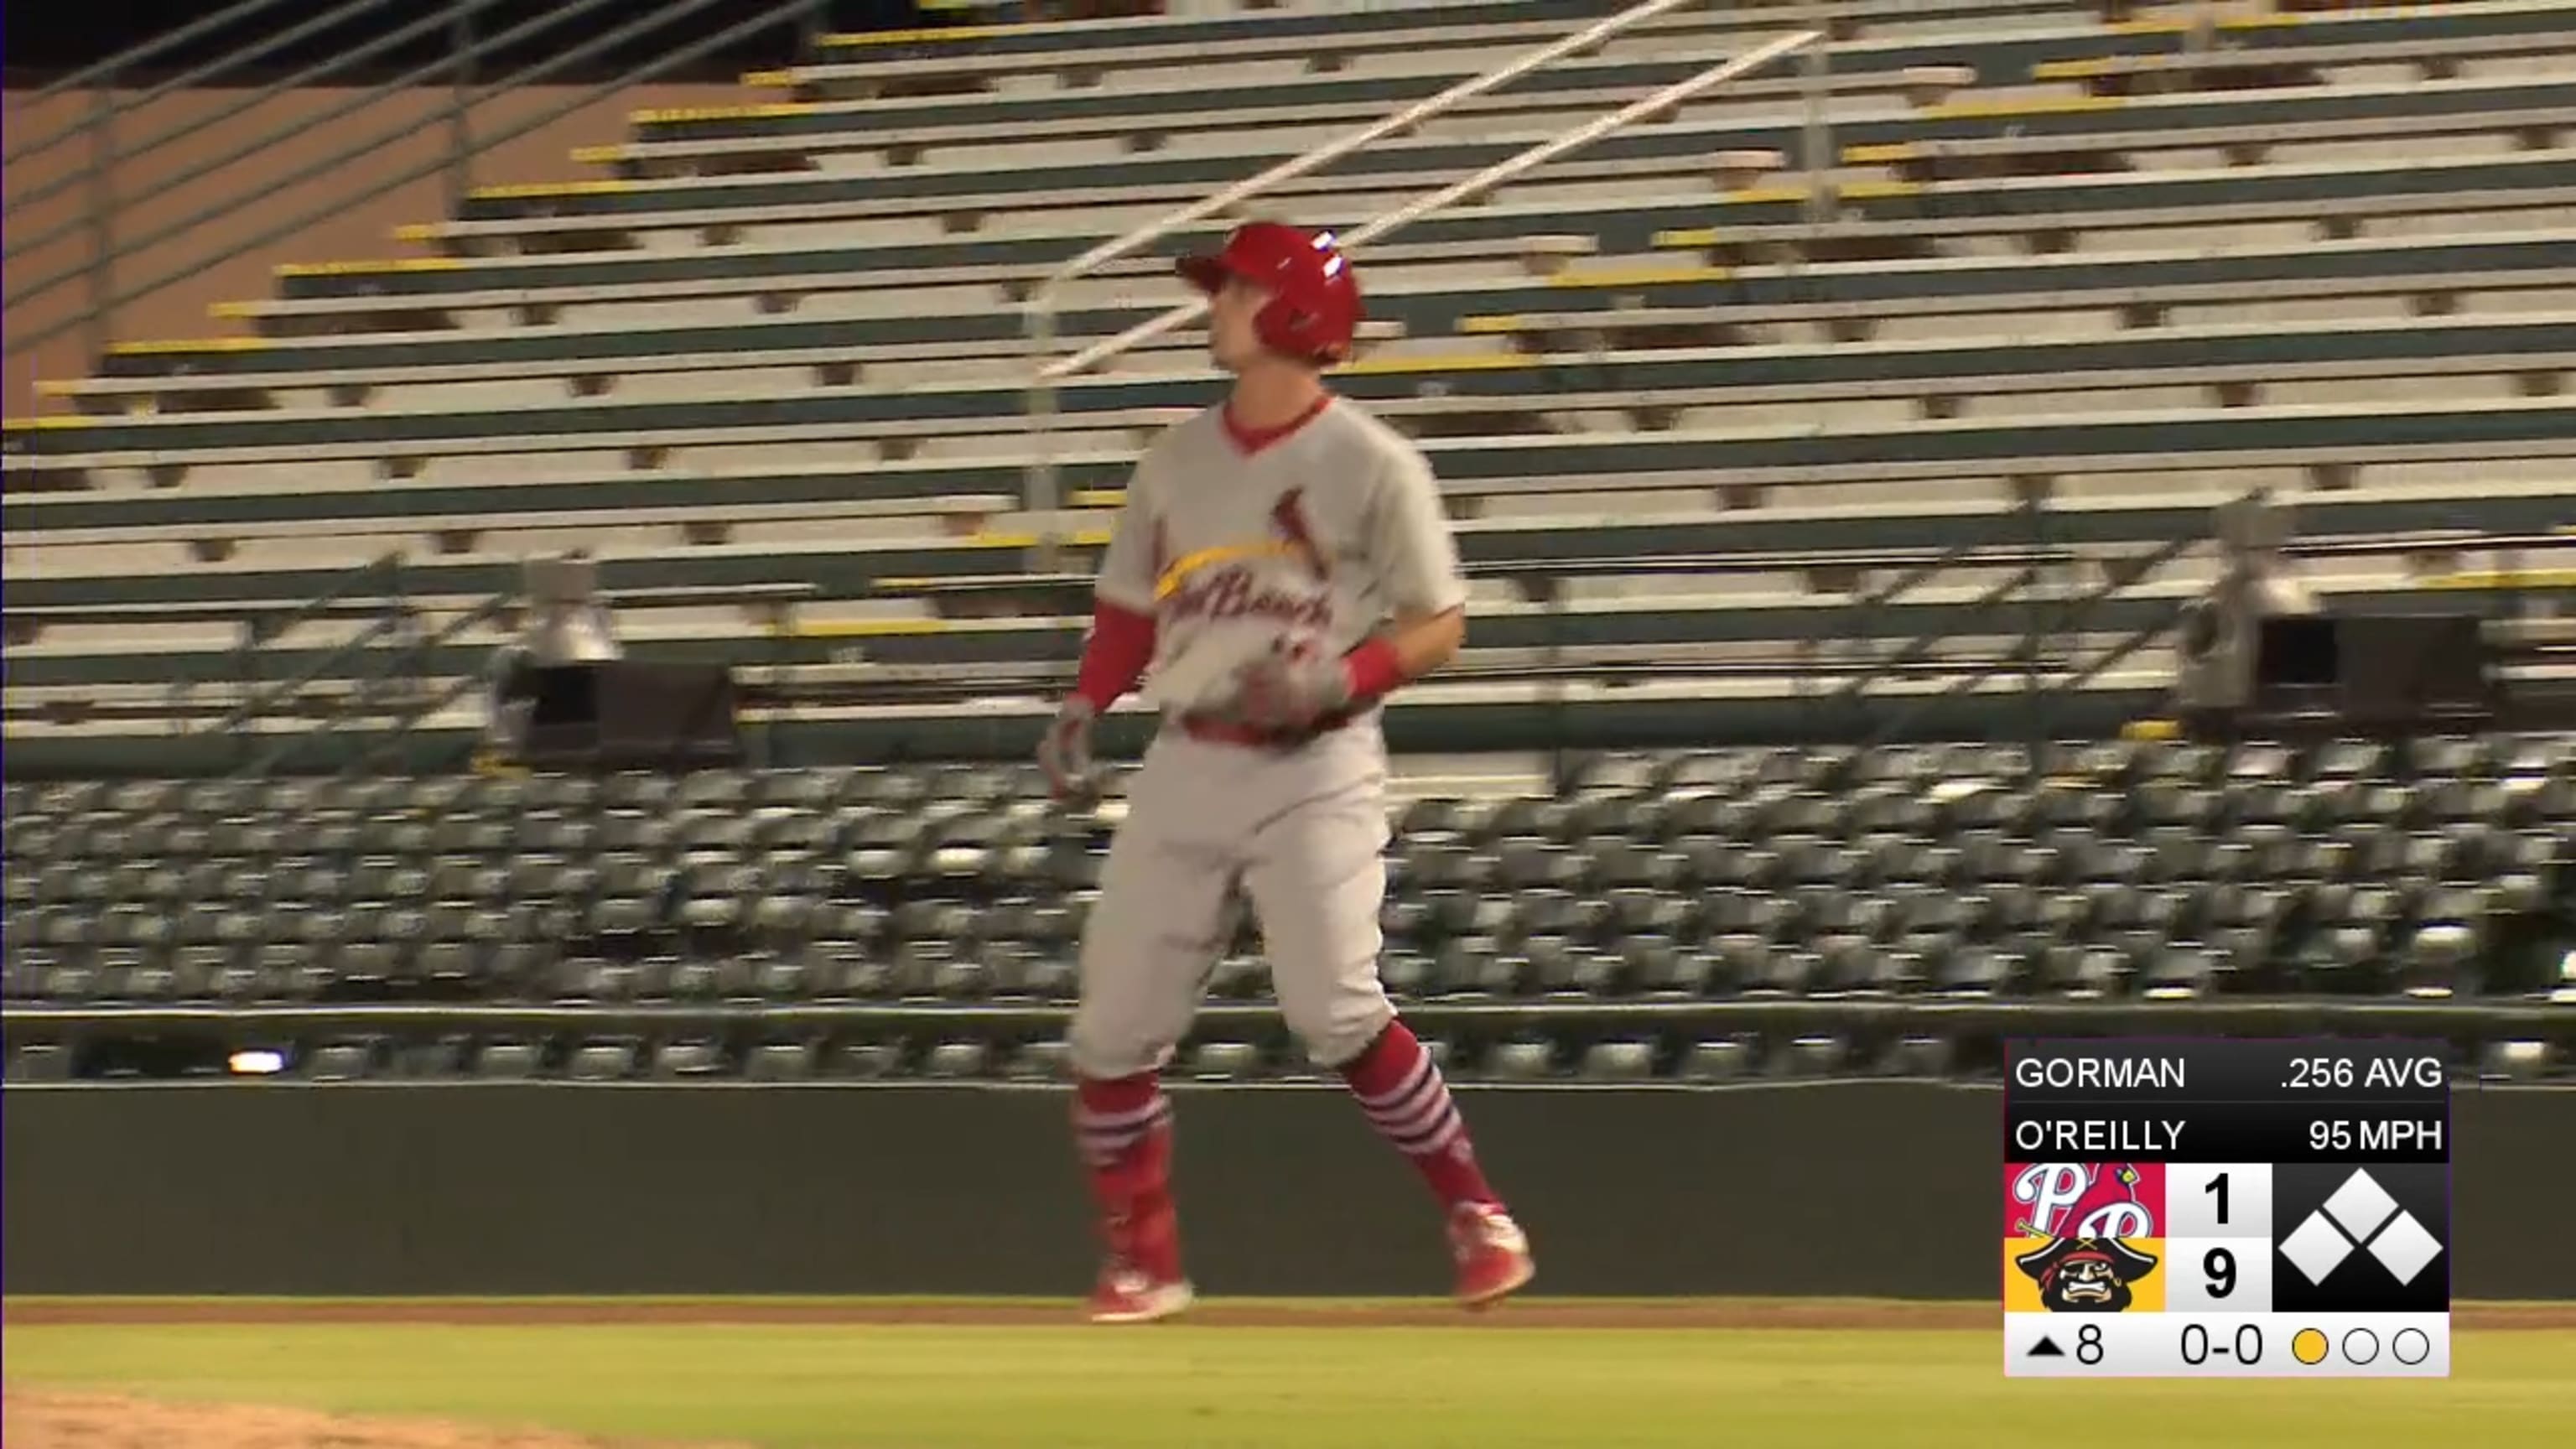 Cardinals prospect Nolan Gorman's be early work ethic helping transition  to second base